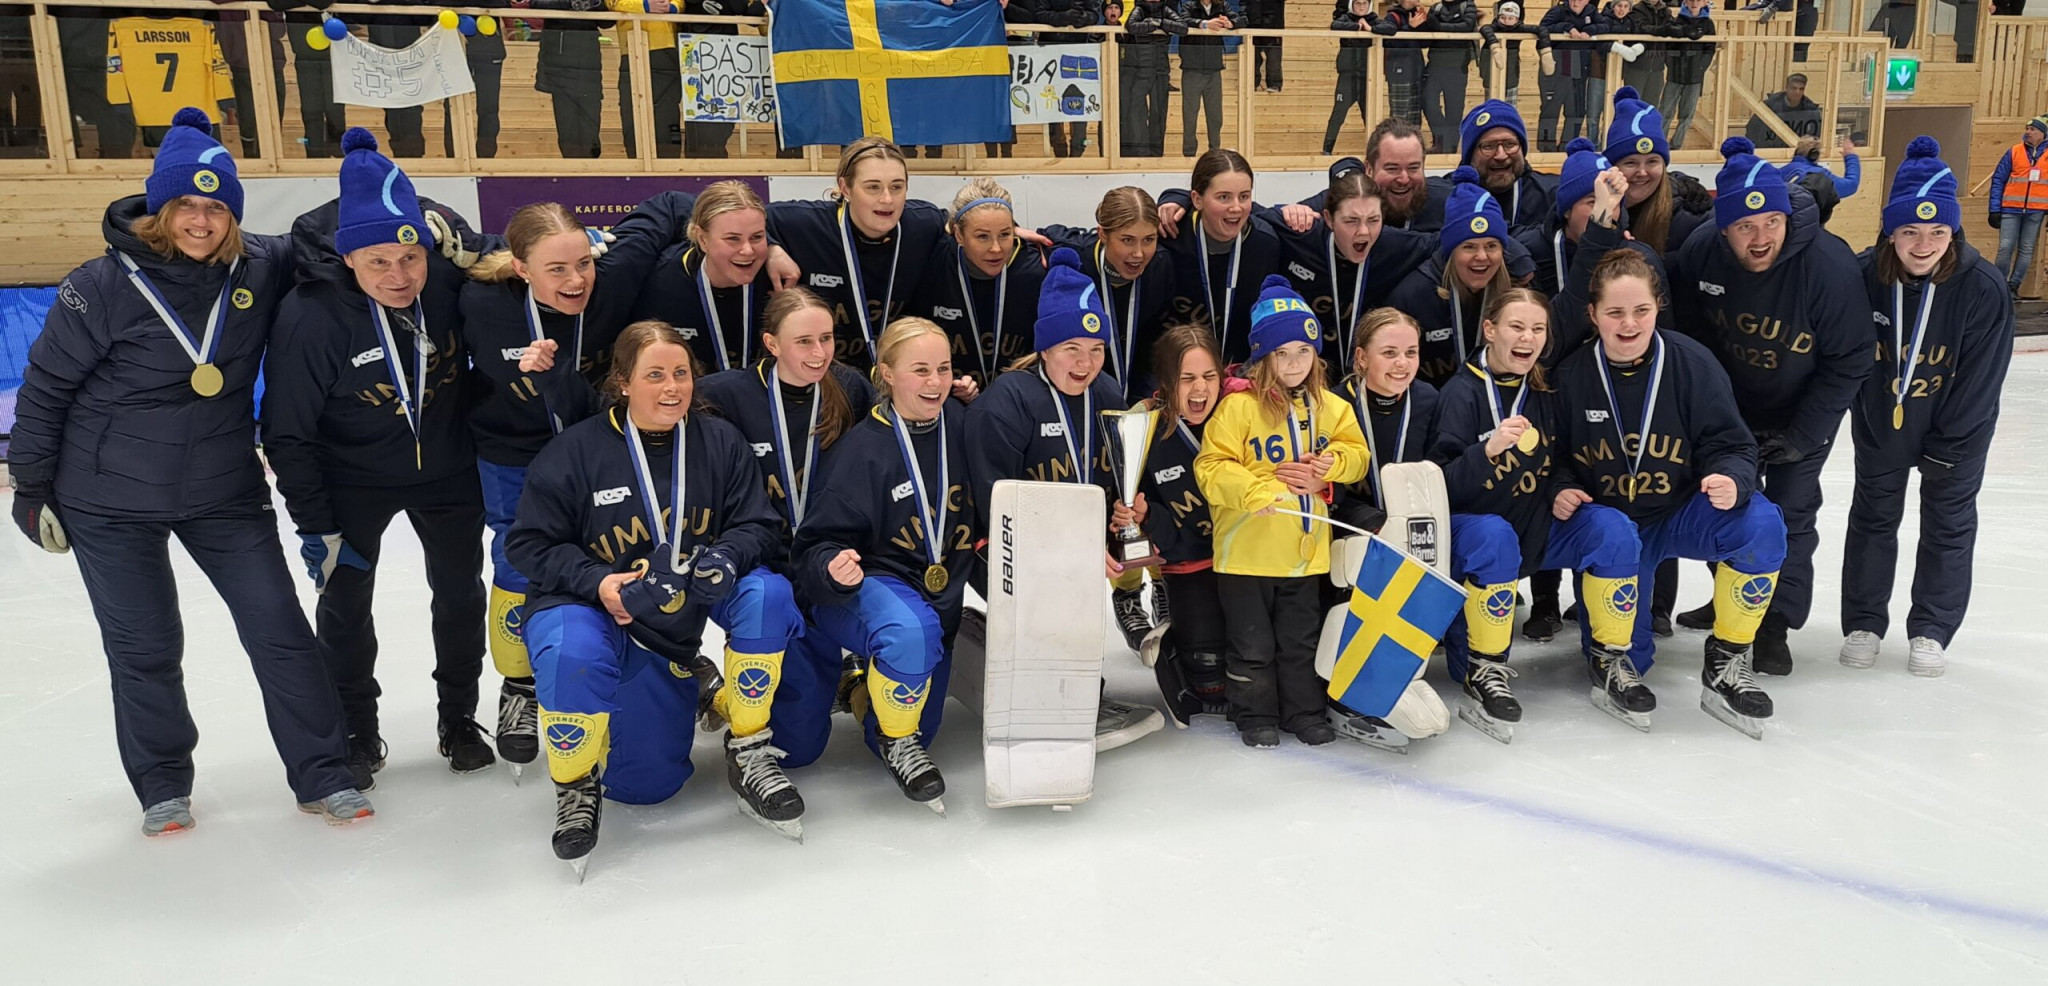 Sweden retained their women's Bandy World Championship title following a 15-0 win over Finland ©FIB